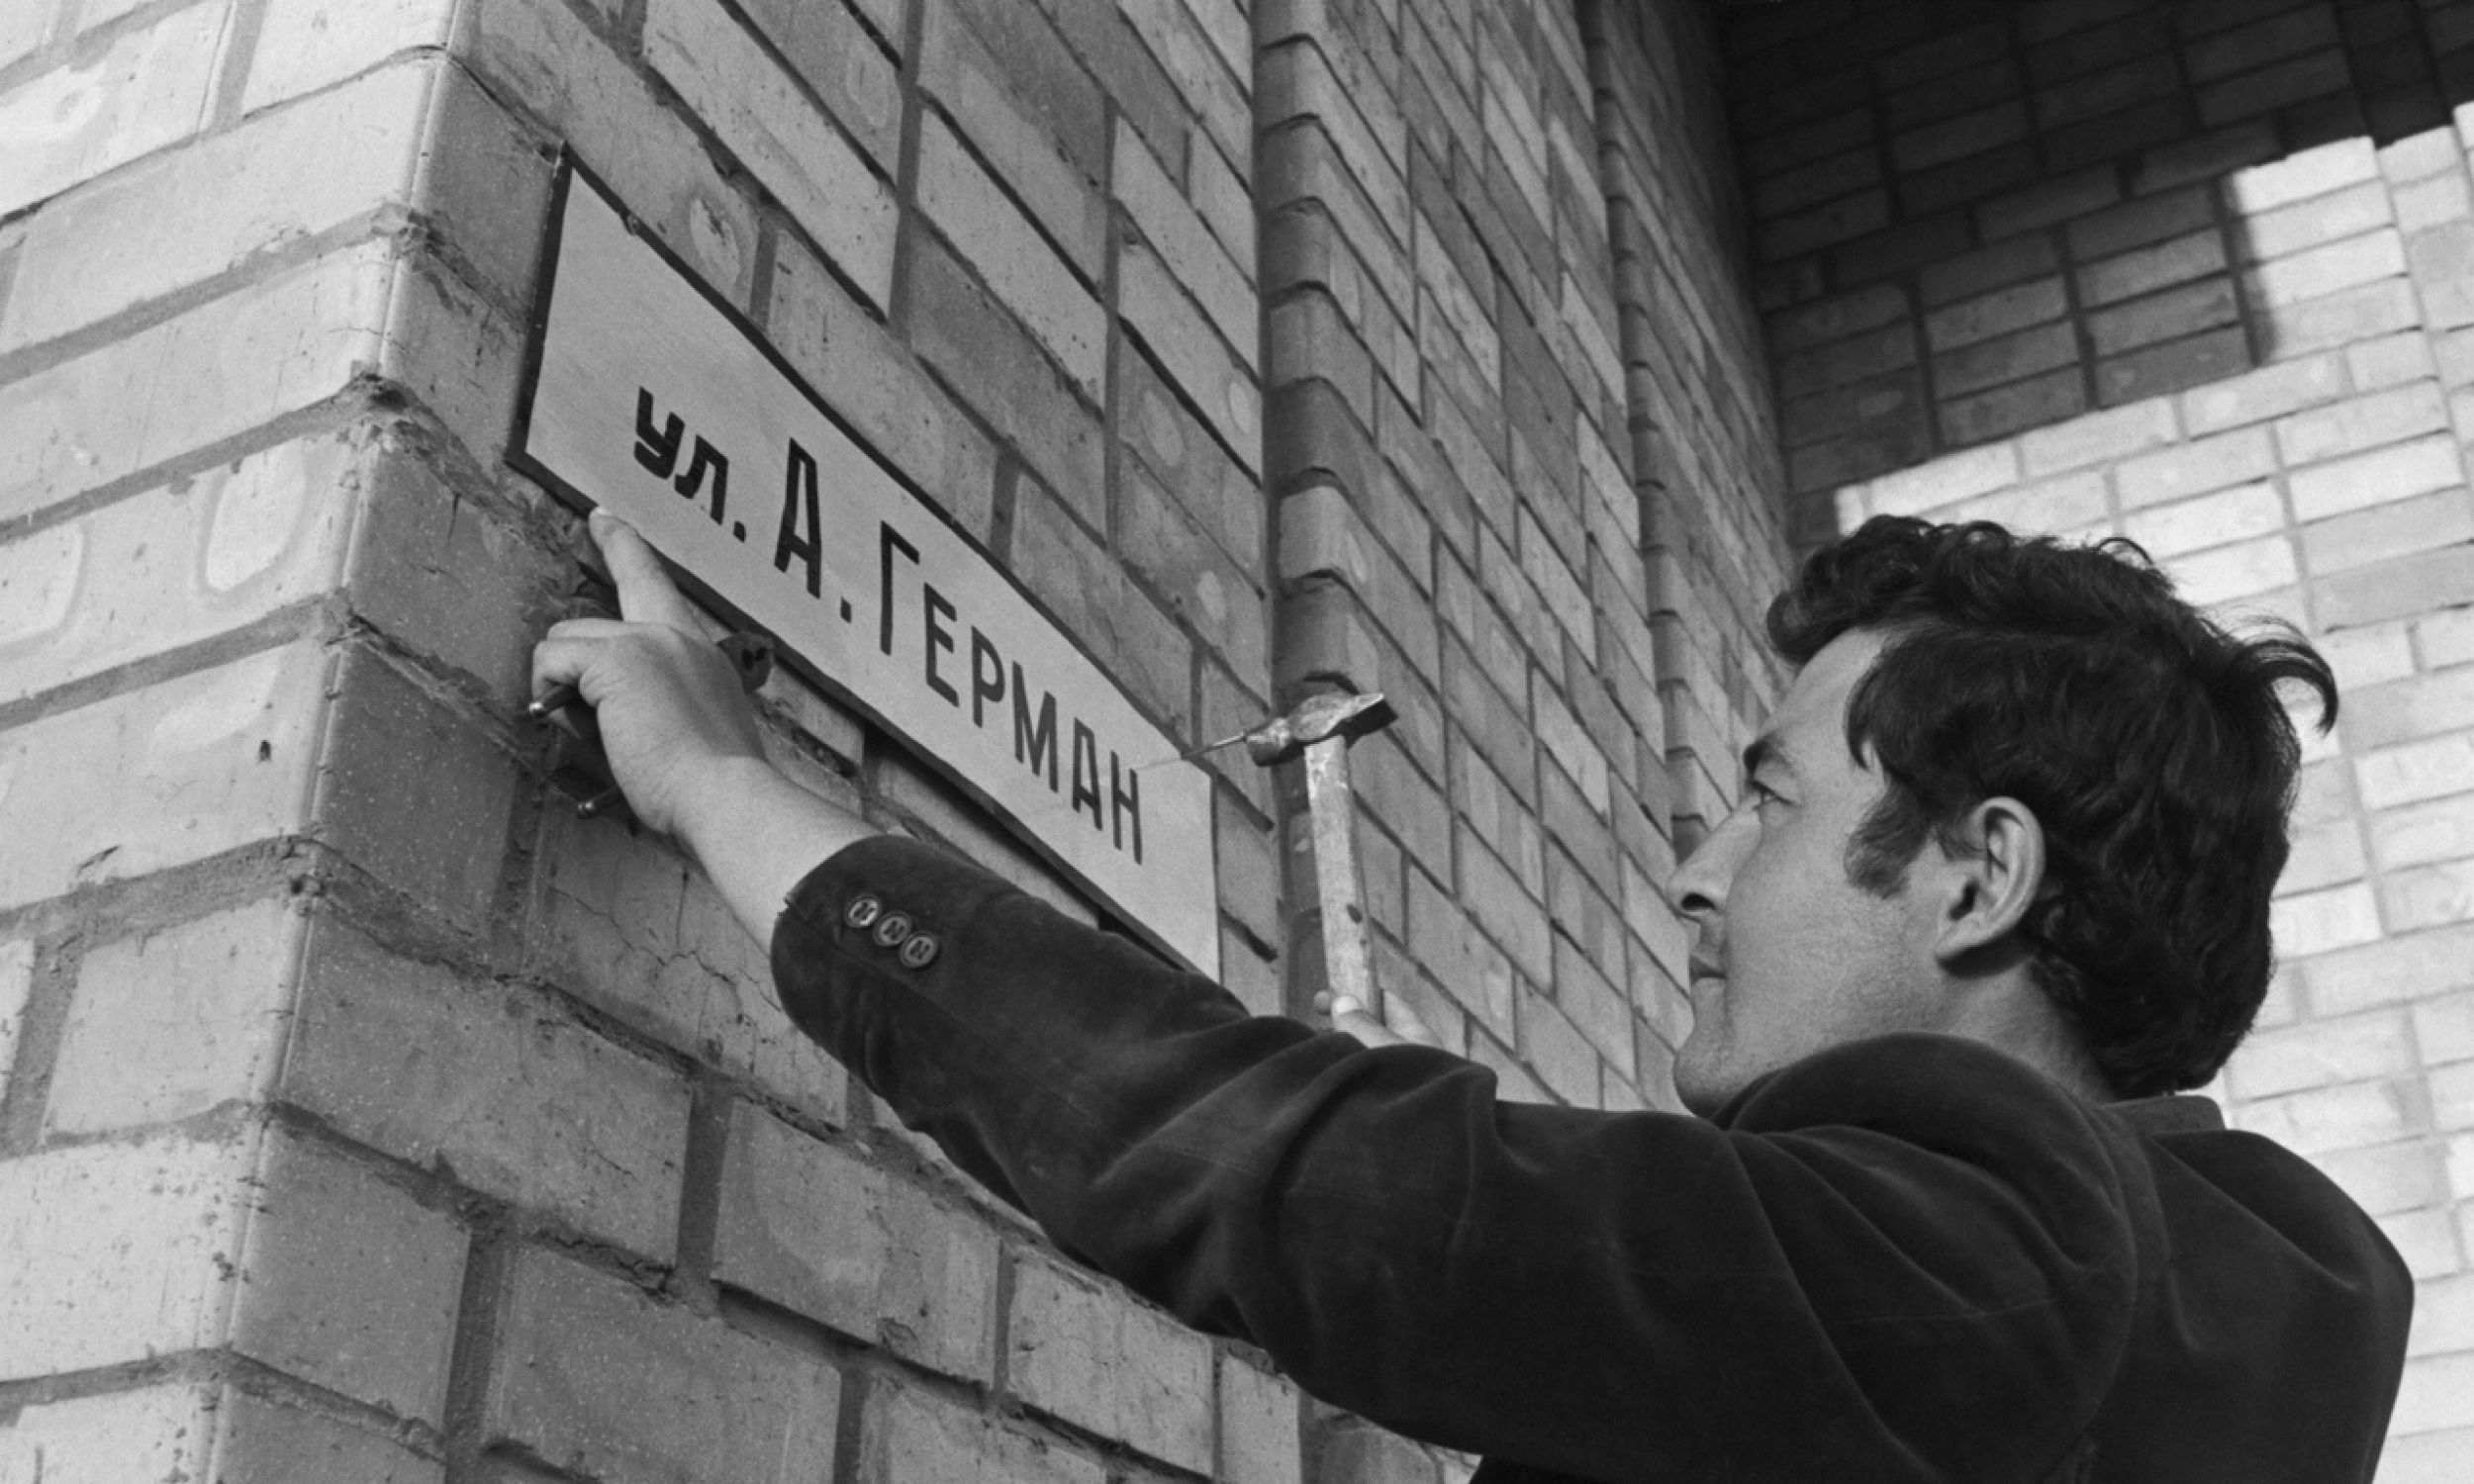 End of the 1980s, Urgench, nailing a plaque with the name of the street in honor of Anna German. Photo: from the archive of Ivan Ilichev-Volkanovski